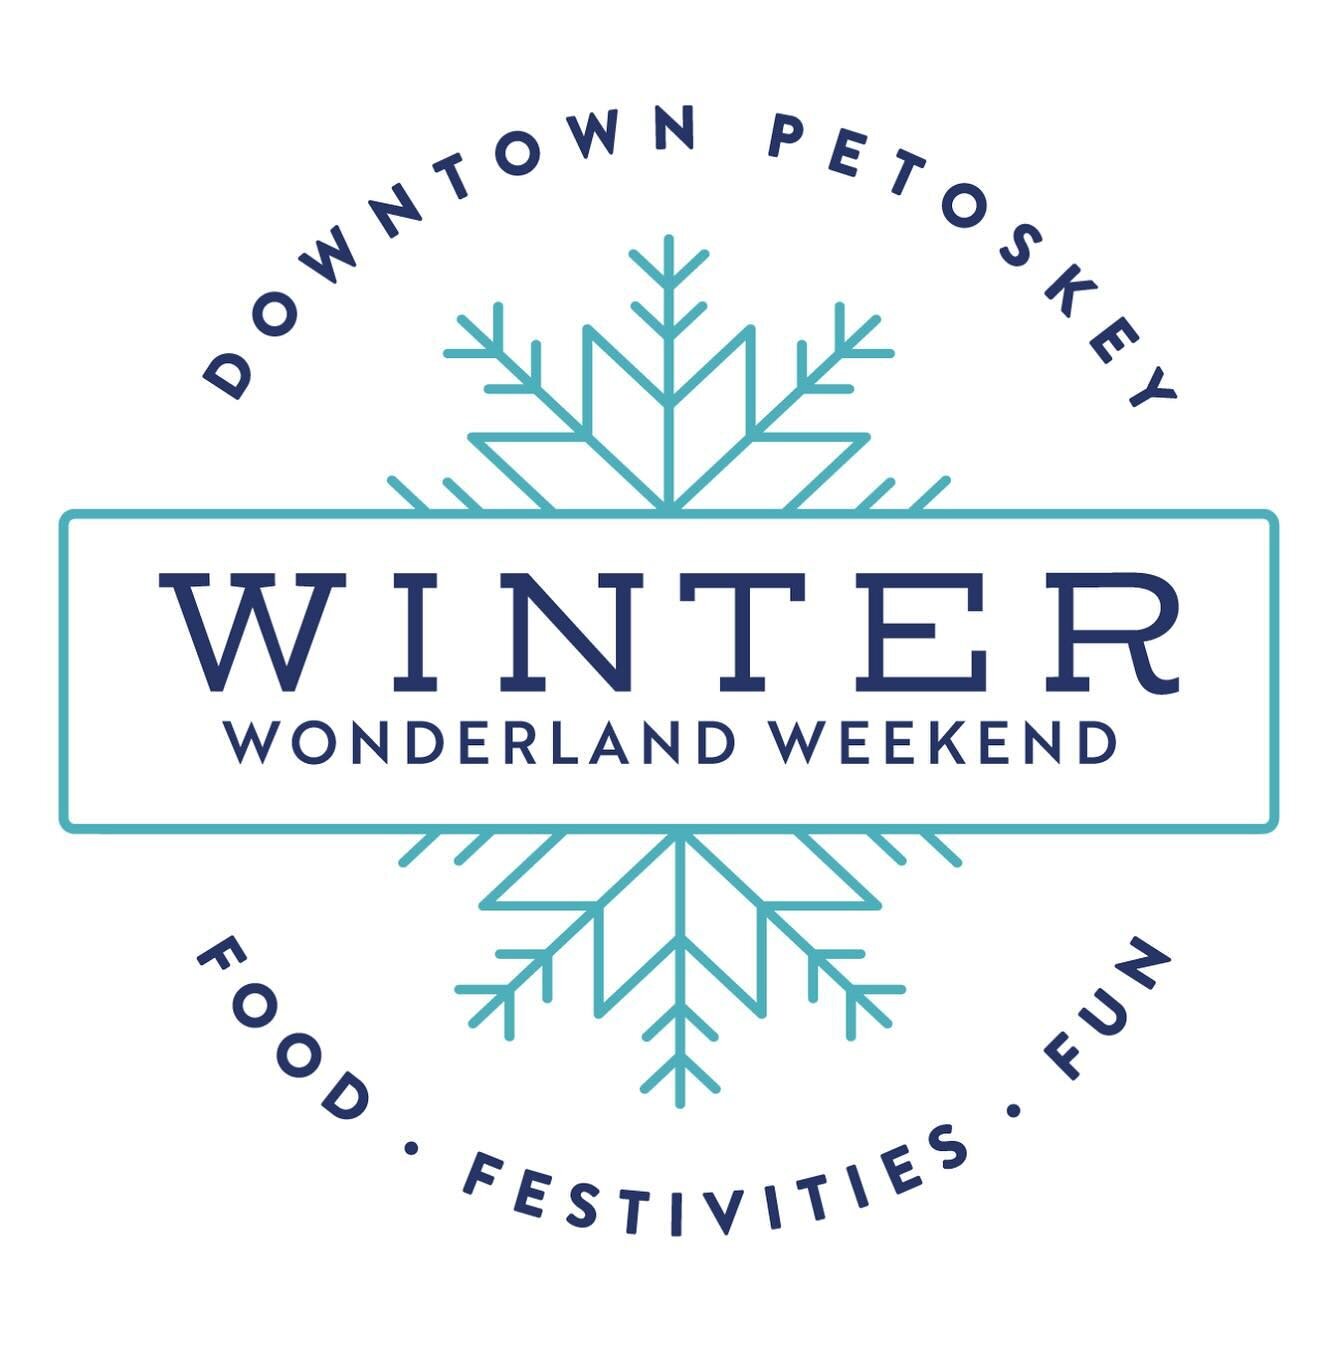 Winter Wonderland Weekend! Petoskey will feature ice carving demos, shopping, restaurant specials, a scavenger hunt through downtown shops, and a Downtown Dollars shopping contest.

Snap a photo with our &lsquo;icy cup&rsquo; and your NPC beverage an